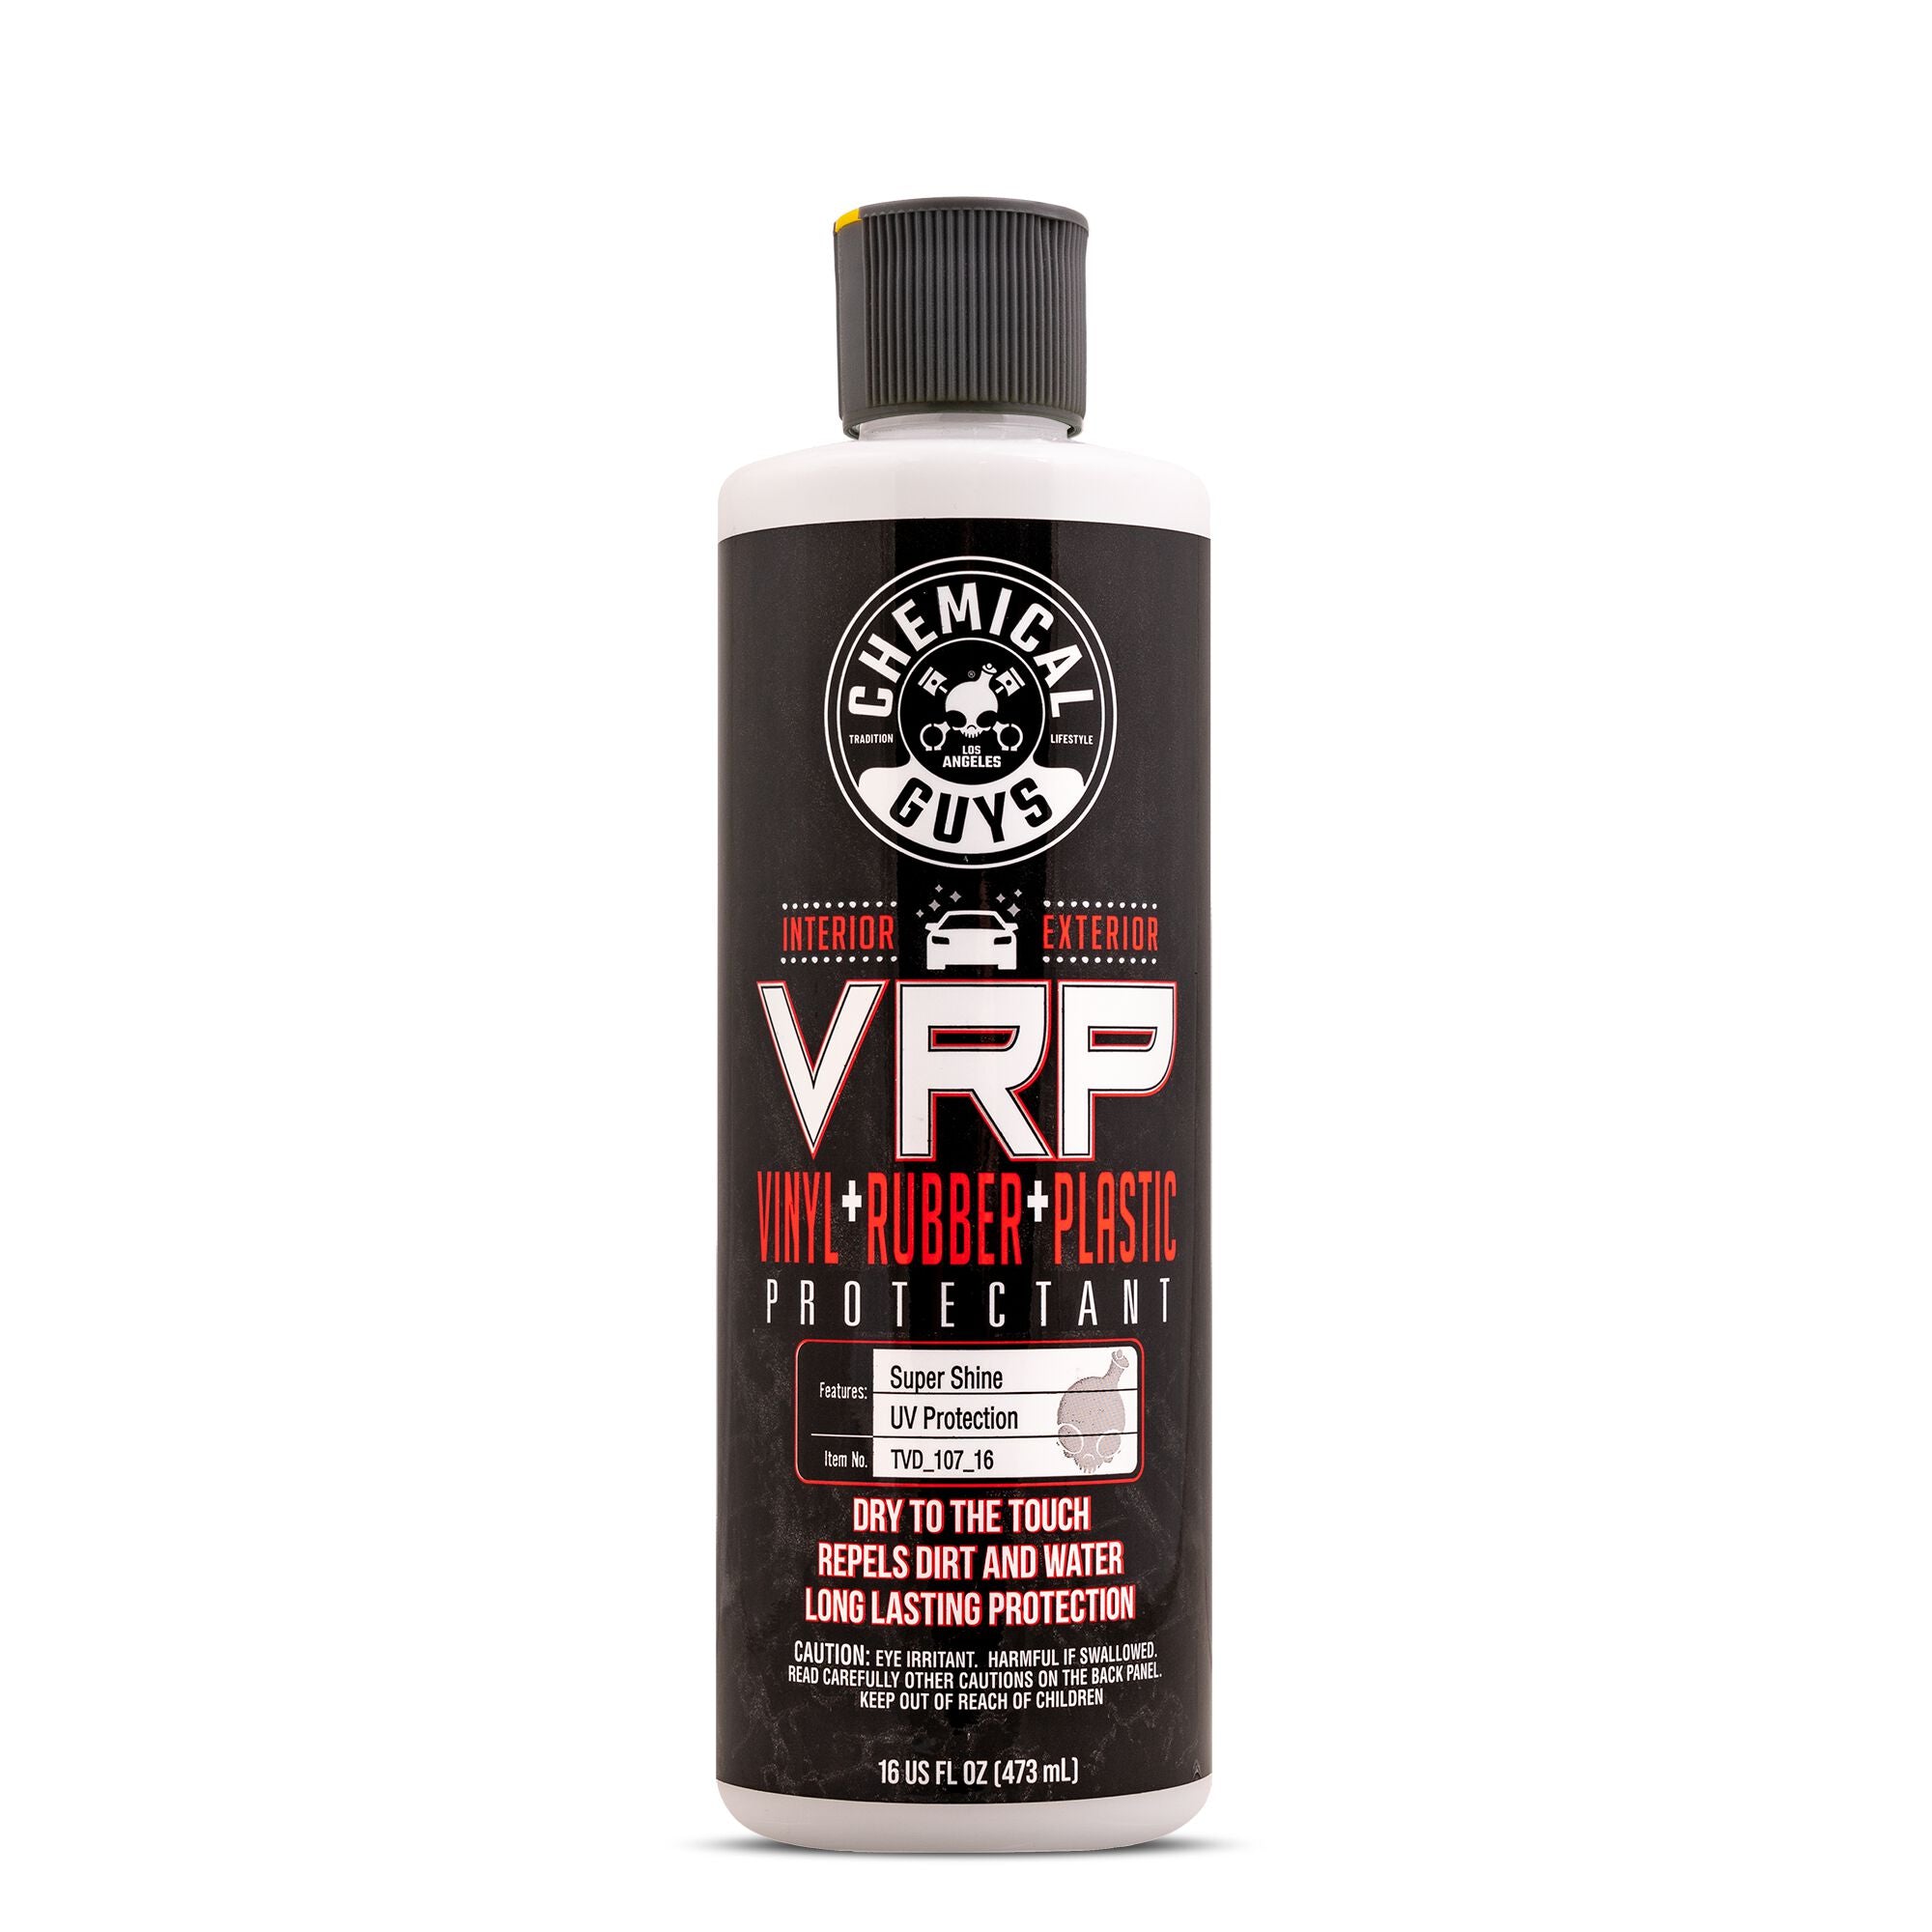 VRP Vinyl, Rubber, Plastic Shine and Protectant | Chemical Guys